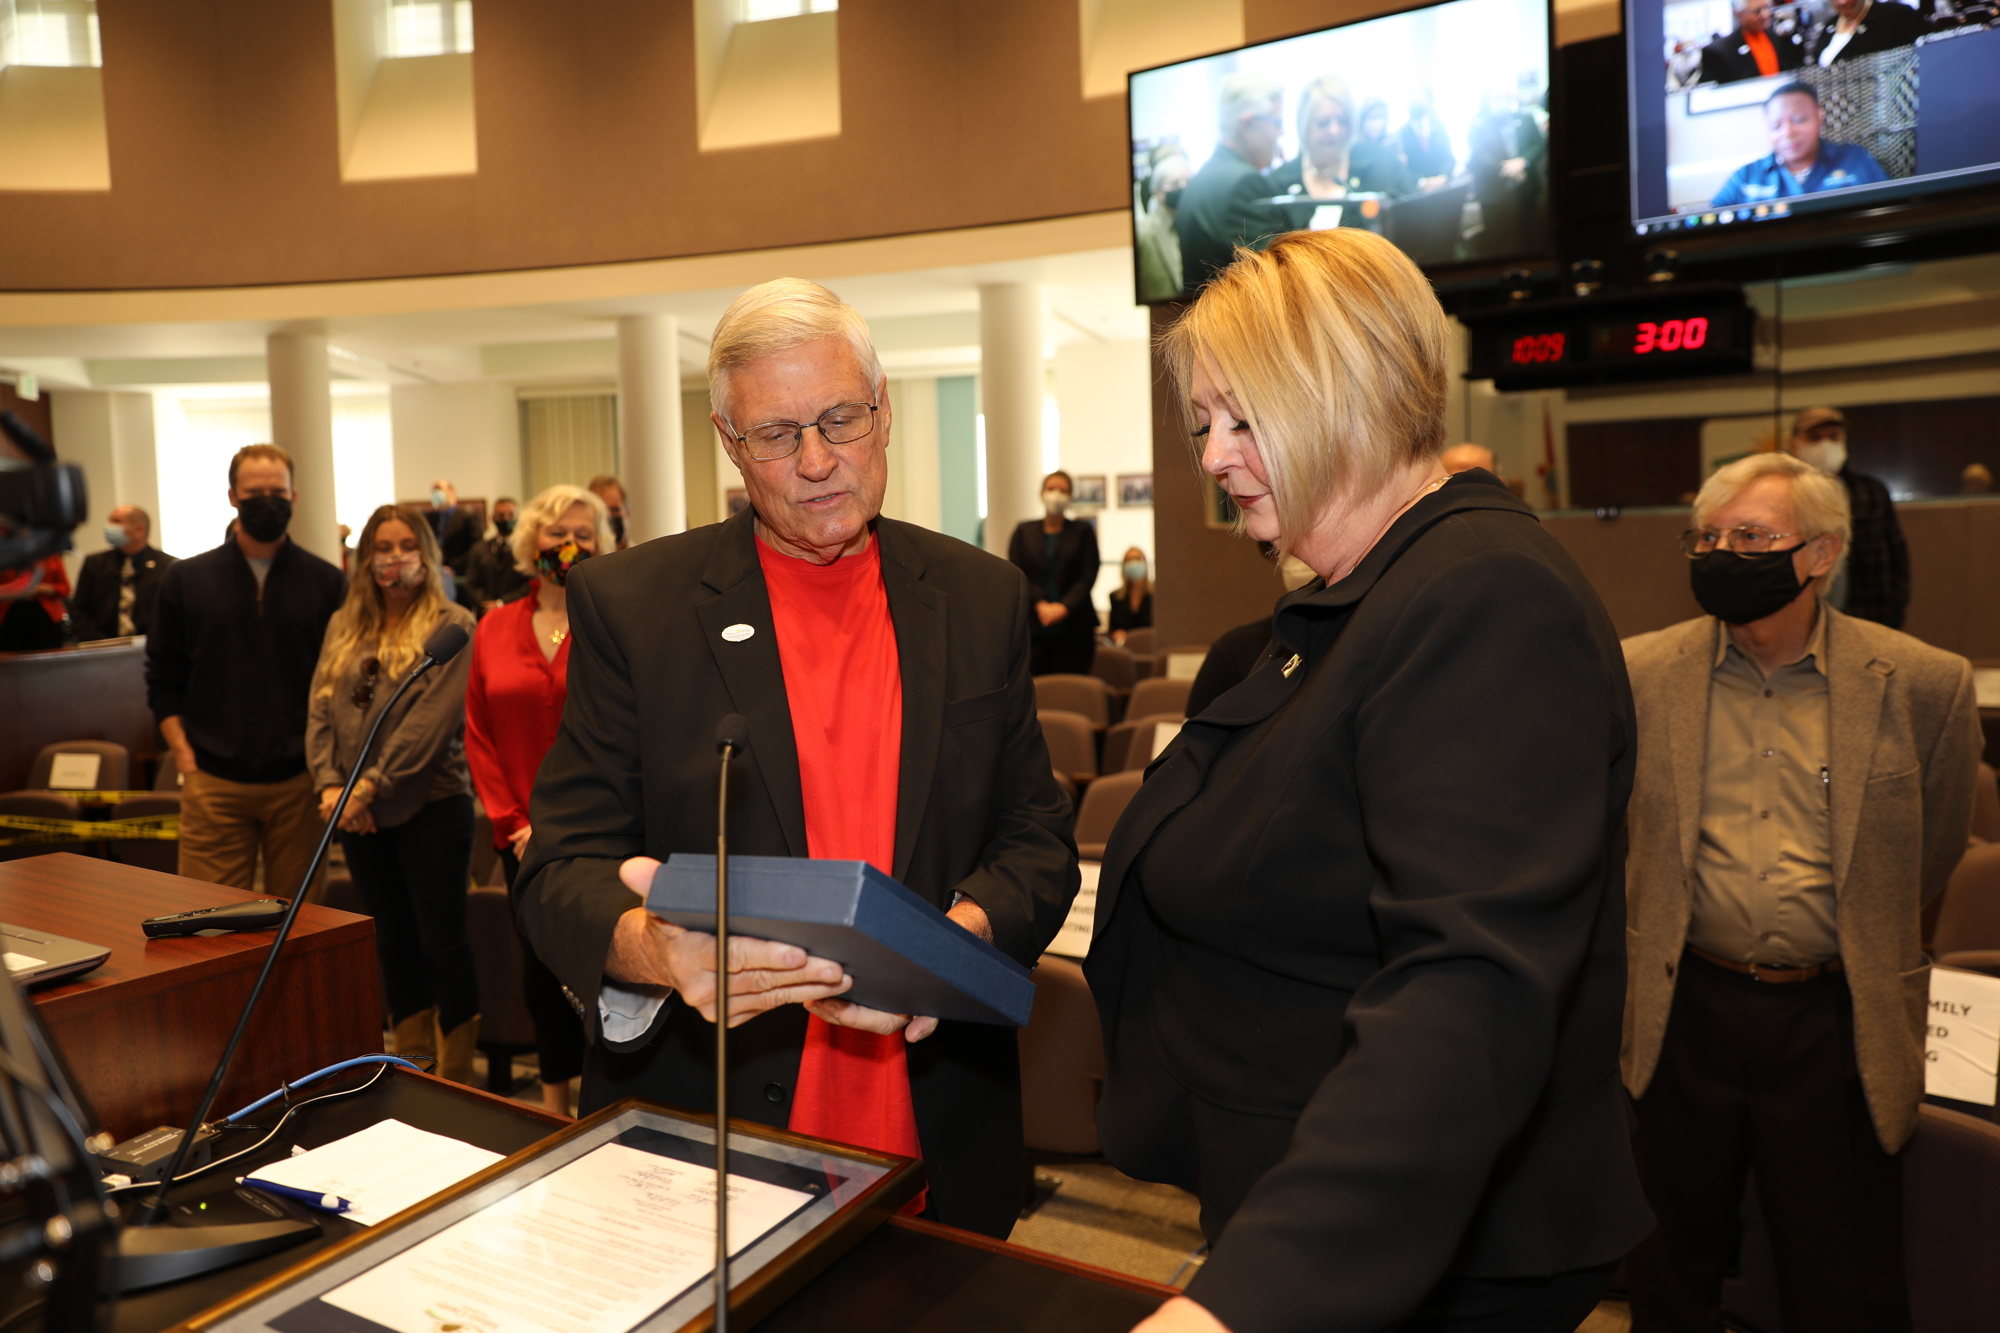 Councilman Fred Lowry reads the proclamation to Councilwoman Deb Denys. Photo courtesy of Volusia County Government